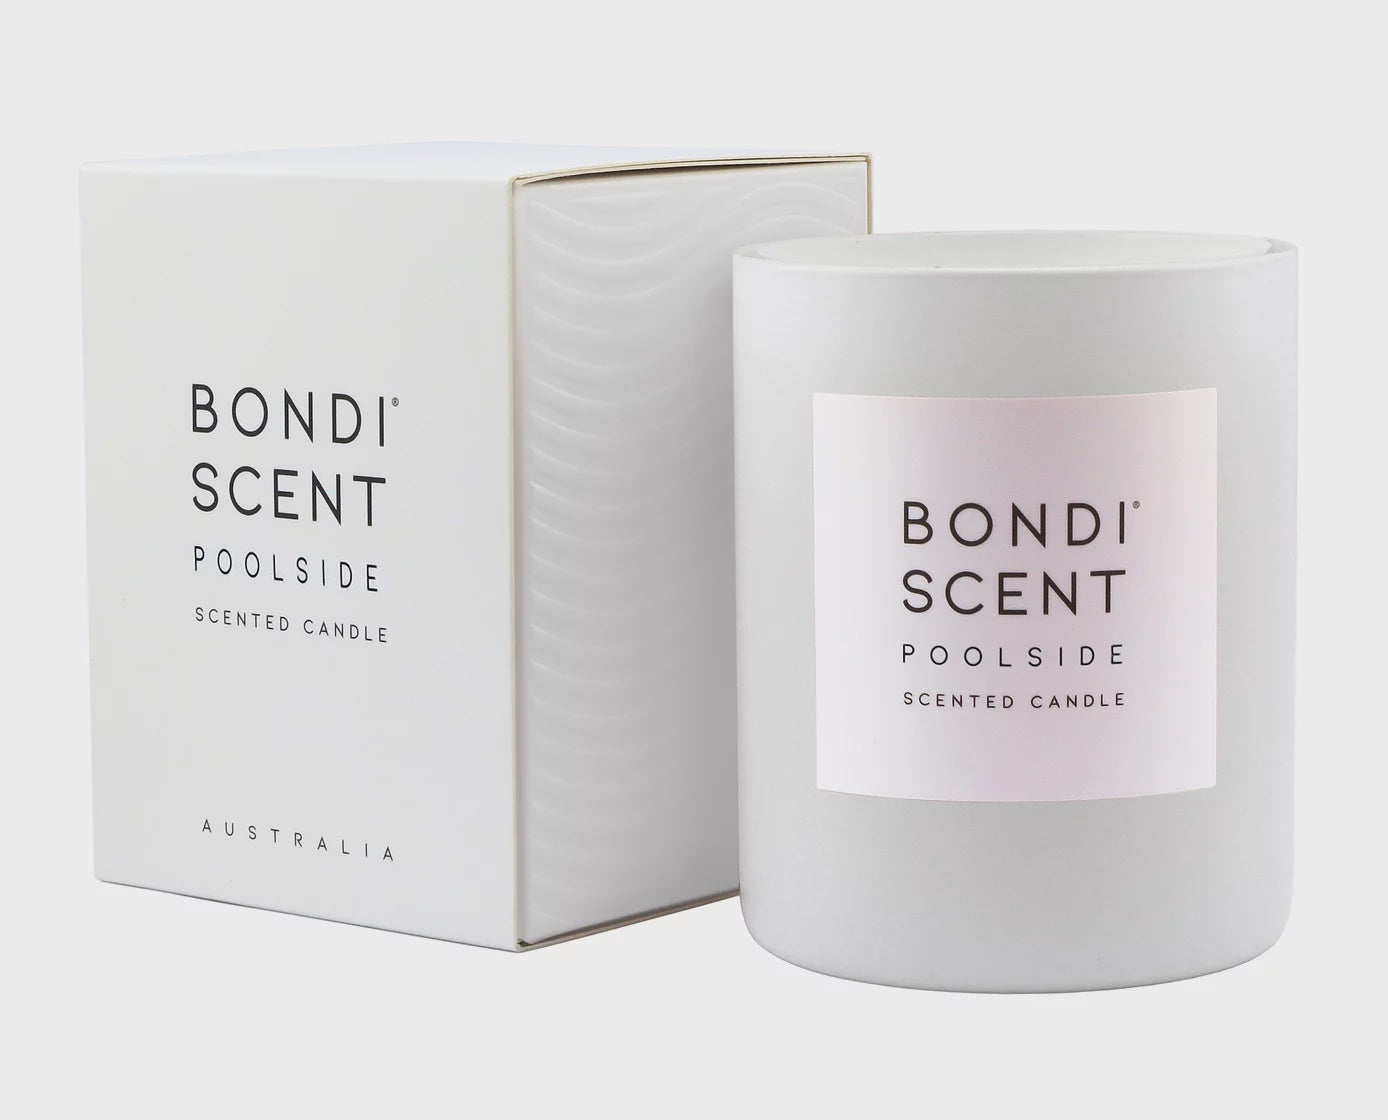 Poolside - Scented Candle